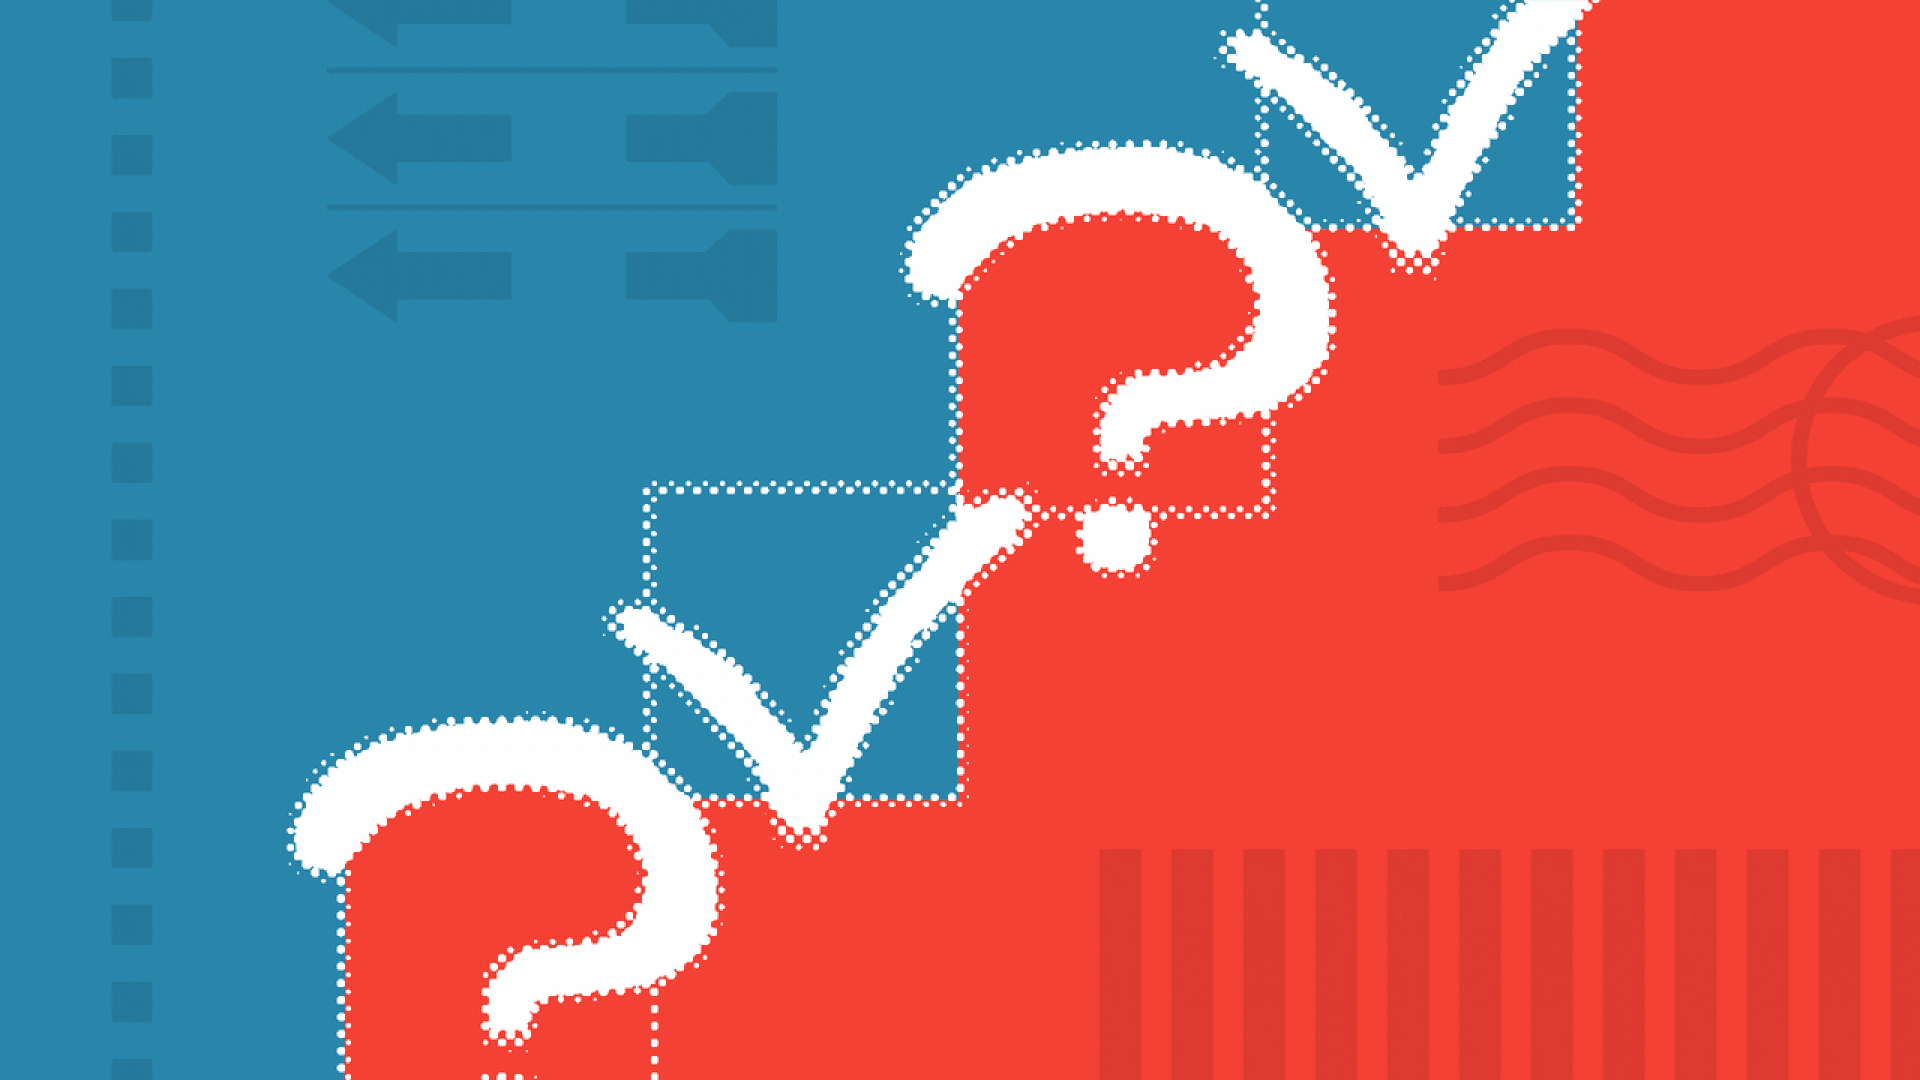 Illustration of a pattern of checkmarks that turn into question marks and vice versa, over a red and blue background with a pattern of ballot elements.